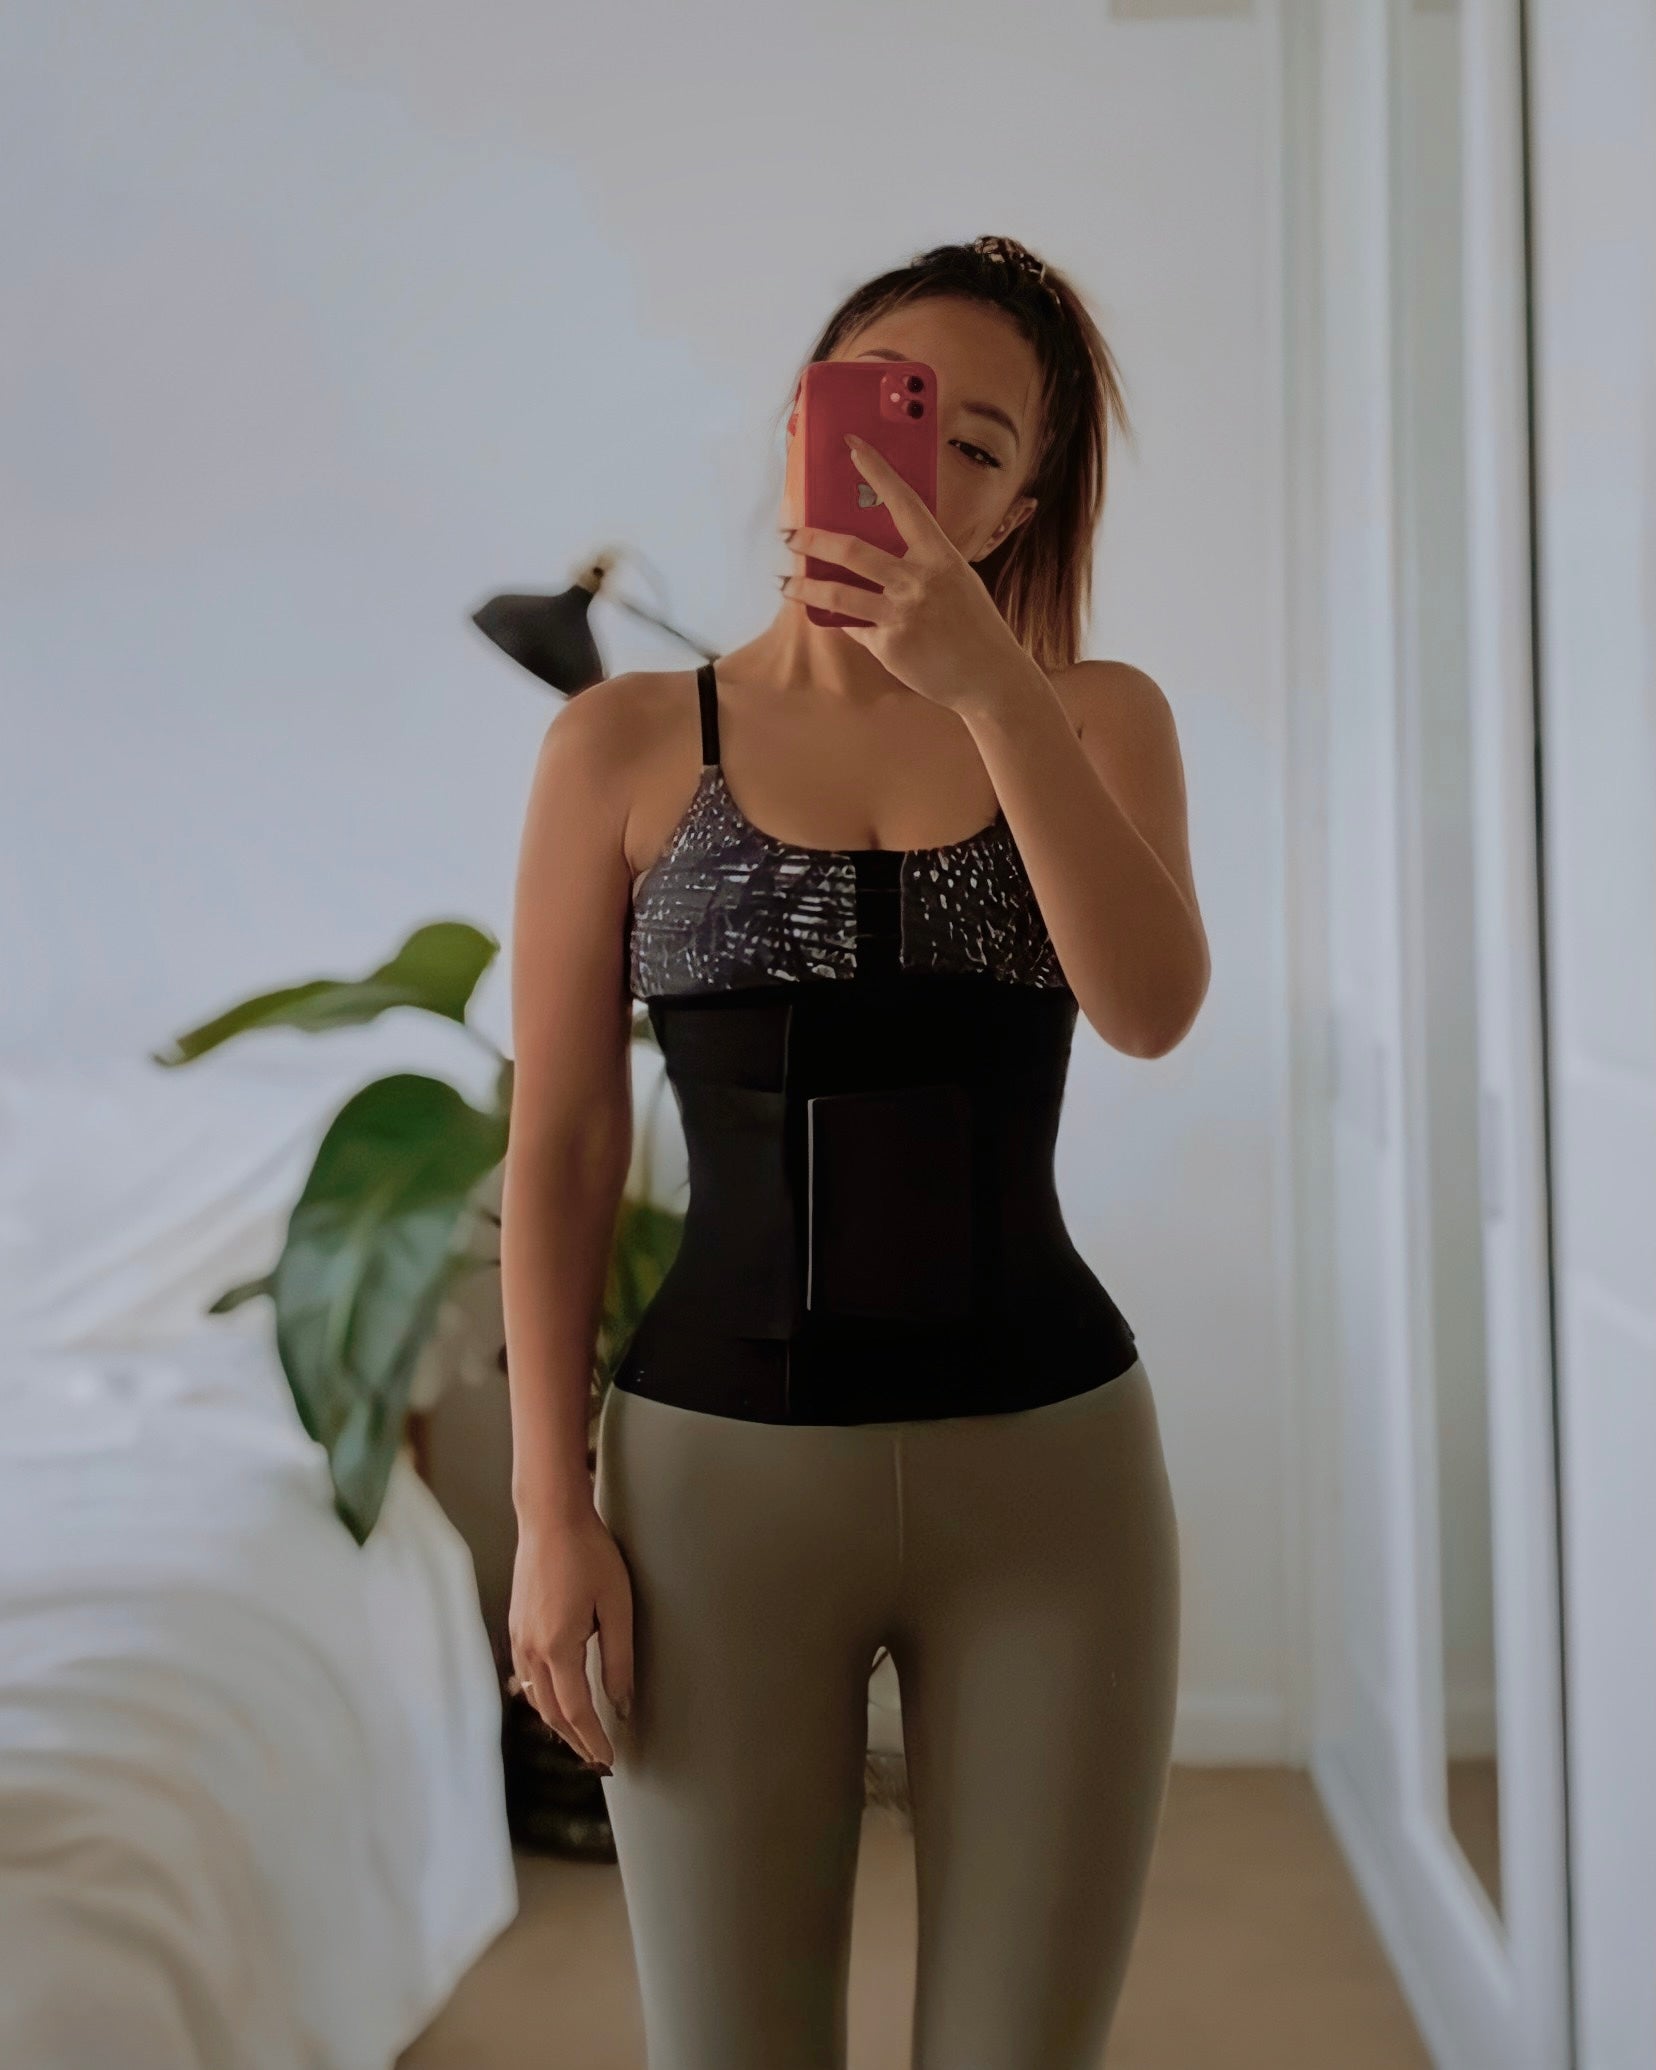 What's the Difference Between a Corset and a Waist Trainer?